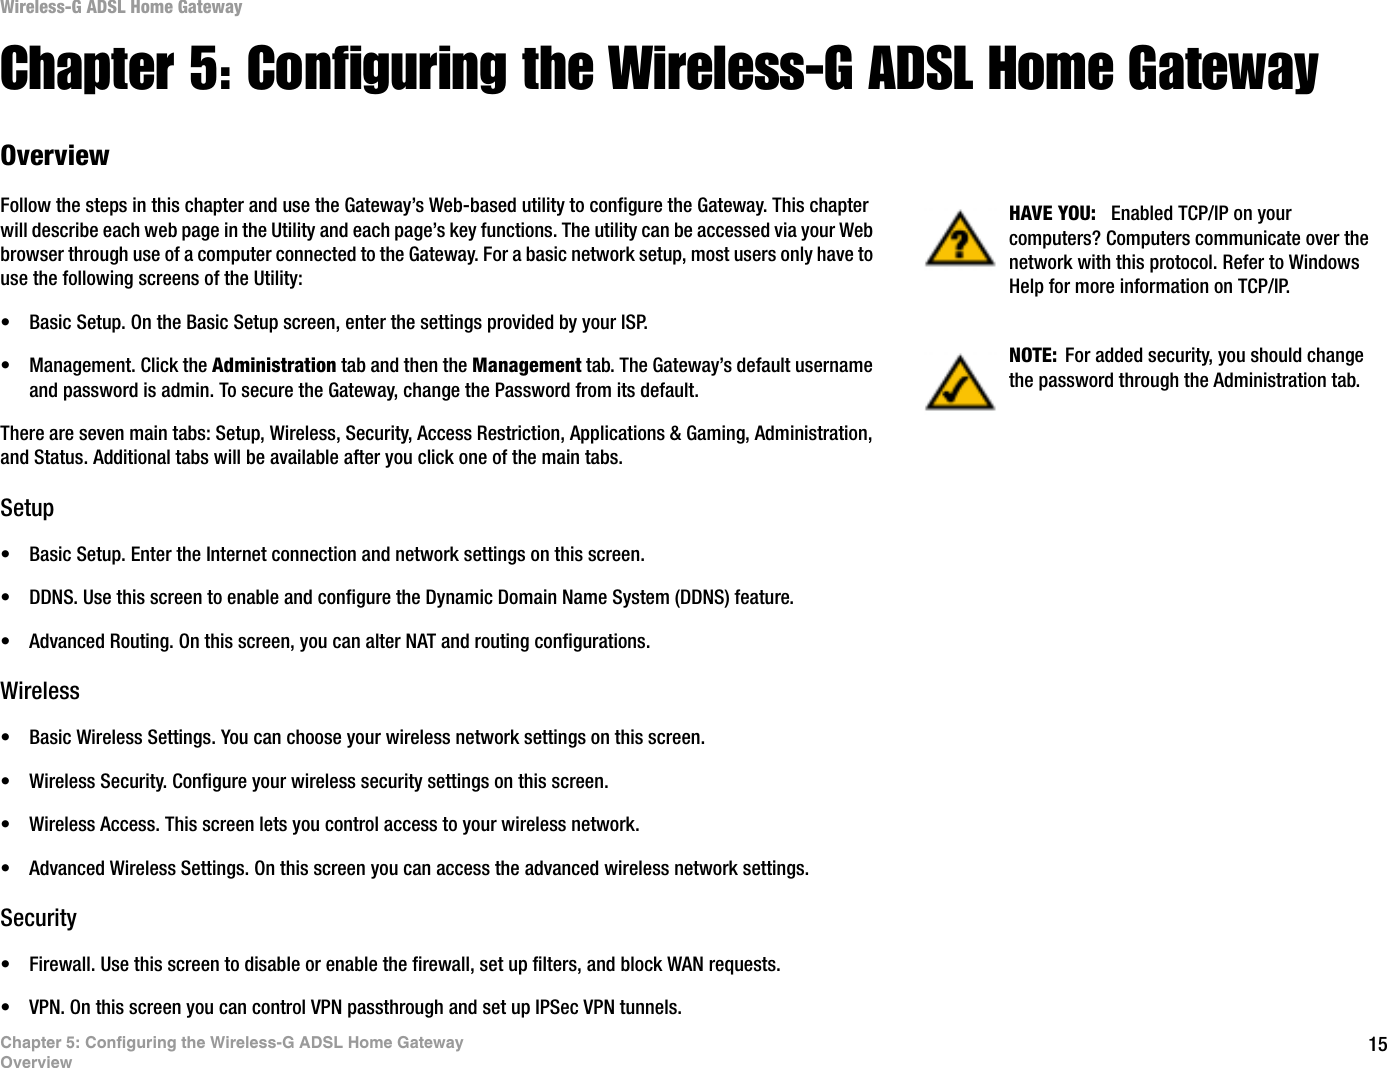 15Chapter 5: Configuring the Wireless-G ADSL Home GatewayOverviewWireless-G ADSL Home GatewayChapter 5: Configuring the Wireless-G ADSL Home GatewayOverviewFollow the steps in this chapter and use the Gateway’s Web-based utility to configure the Gateway. This chapter will describe each web page in the Utility and each page’s key functions. The utility can be accessed via your Web browser through use of a computer connected to the Gateway. For a basic network setup, most users only have to use the following screens of the Utility:• Basic Setup. On the Basic Setup screen, enter the settings provided by your ISP.• Management. Click the Administration tab and then the Management tab. The Gateway’s default username and password is admin. To secure the Gateway, change the Password from its default.There are seven main tabs: Setup, Wireless, Security, Access Restriction, Applications &amp; Gaming, Administration, and Status. Additional tabs will be available after you click one of the main tabs.Setup• Basic Setup. Enter the Internet connection and network settings on this screen.• DDNS. Use this screen to enable and configure the Dynamic Domain Name System (DDNS) feature.• Advanced Routing. On this screen, you can alter NAT and routing configurations.Wireless• Basic Wireless Settings. You can choose your wireless network settings on this screen.• Wireless Security. Configure your wireless security settings on this screen.• Wireless Access. This screen lets you control access to your wireless network.• Advanced Wireless Settings. On this screen you can access the advanced wireless network settings.Security• Firewall. Use this screen to disable or enable the firewall, set up filters, and block WAN requests.• VPN. On this screen you can control VPN passthrough and set up IPSec VPN tunnels.NOTE: For added security, you should change the password through the Administration tab.HAVE YOU: Enabled TCP/IP on your computers? Computers communicate over the network with this protocol. Refer to Windows Help for more information on TCP/IP.